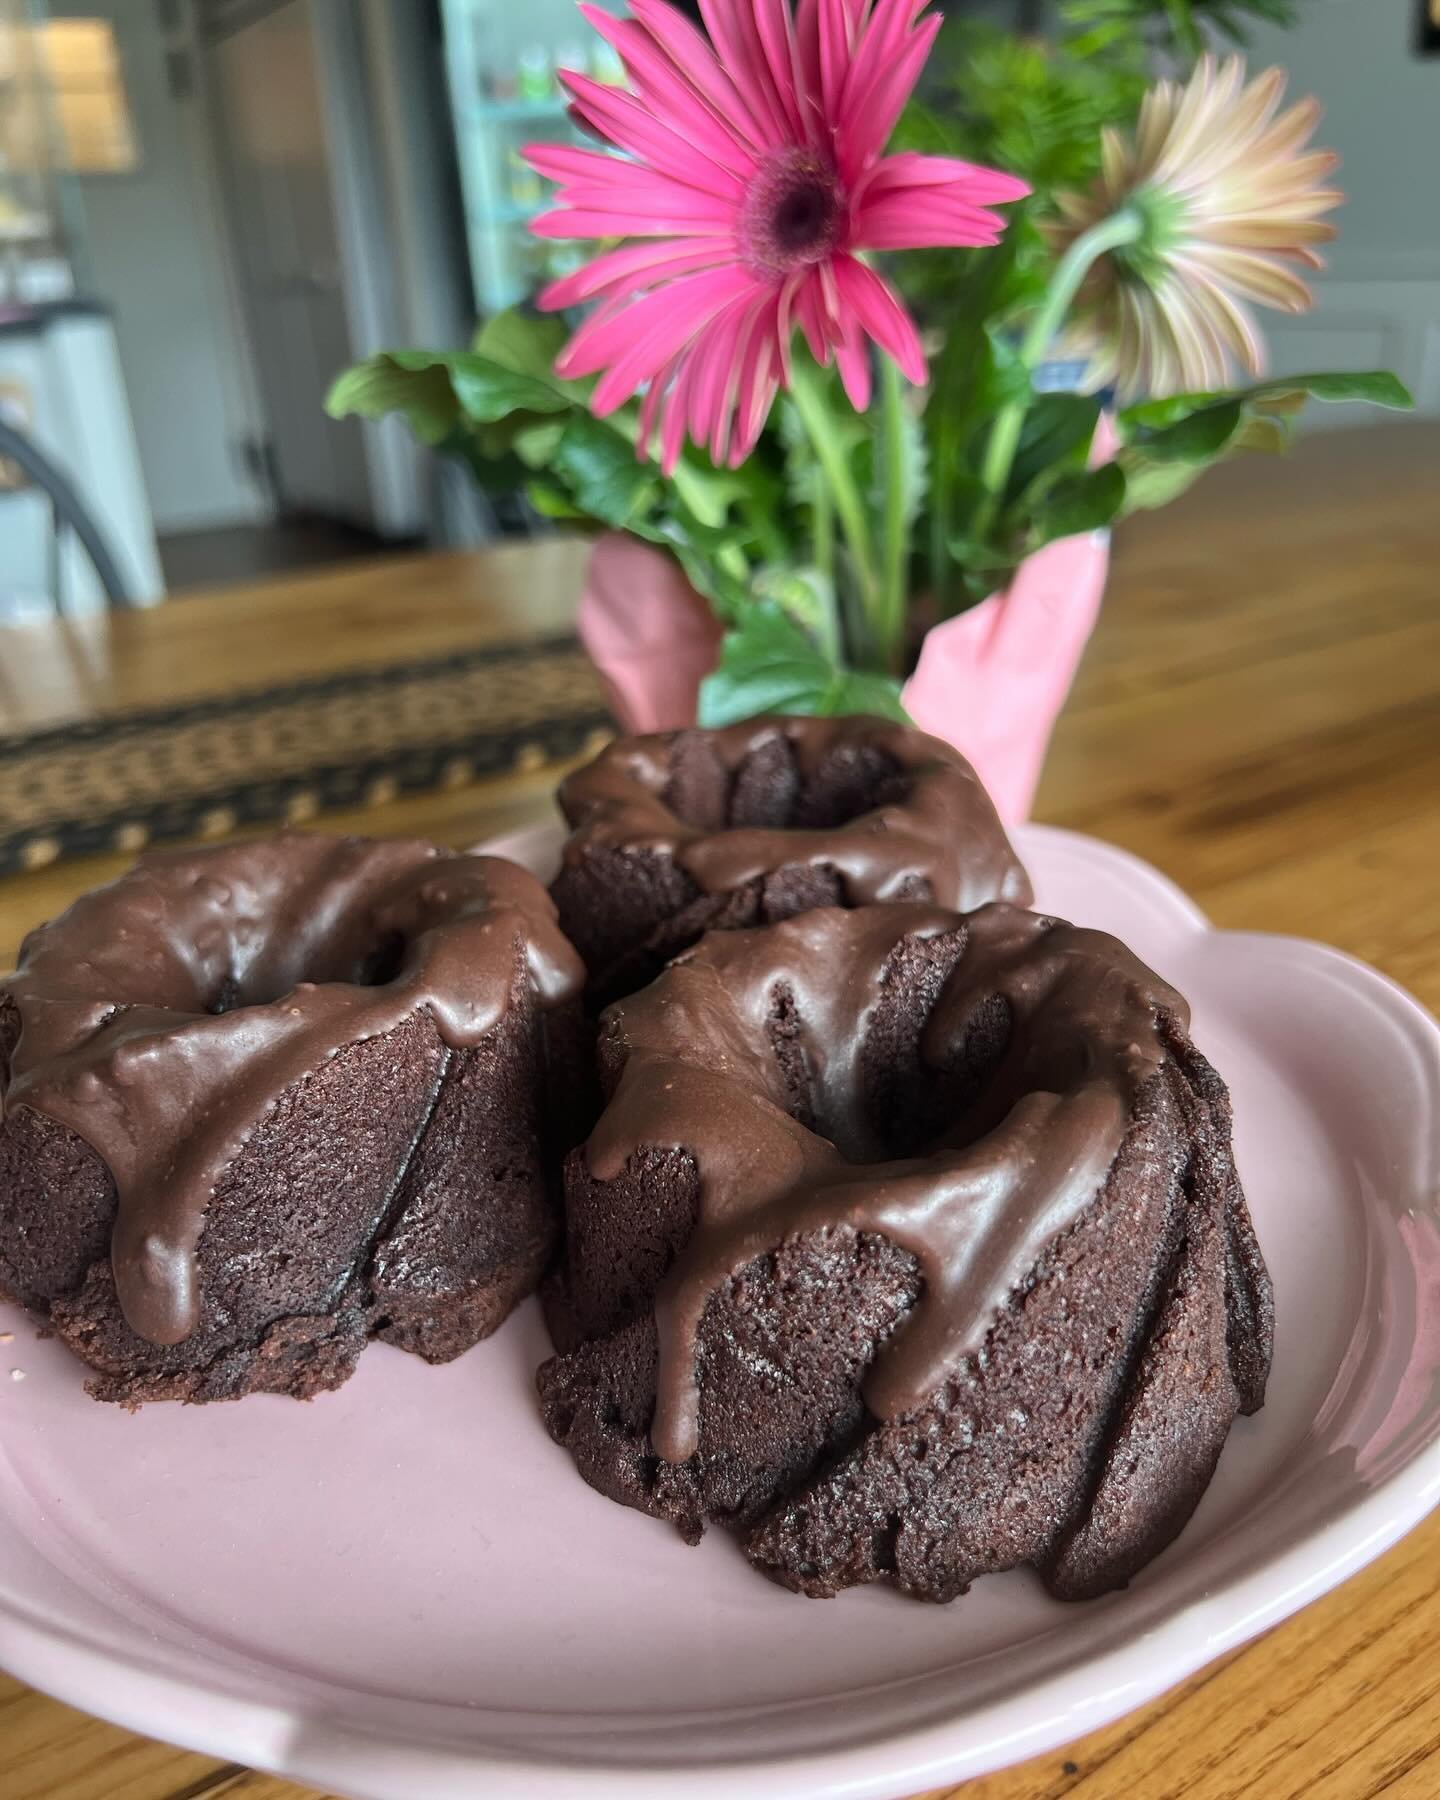 ✨TREAT A TEACHER✨
.
.
It&rsquo;s teacher appreciation week. Let&rsquo;s give a shoutout to all the amazing teachers! Here are our mini chocolate Bundt cakes, a perfect treat for your favorite teacher!